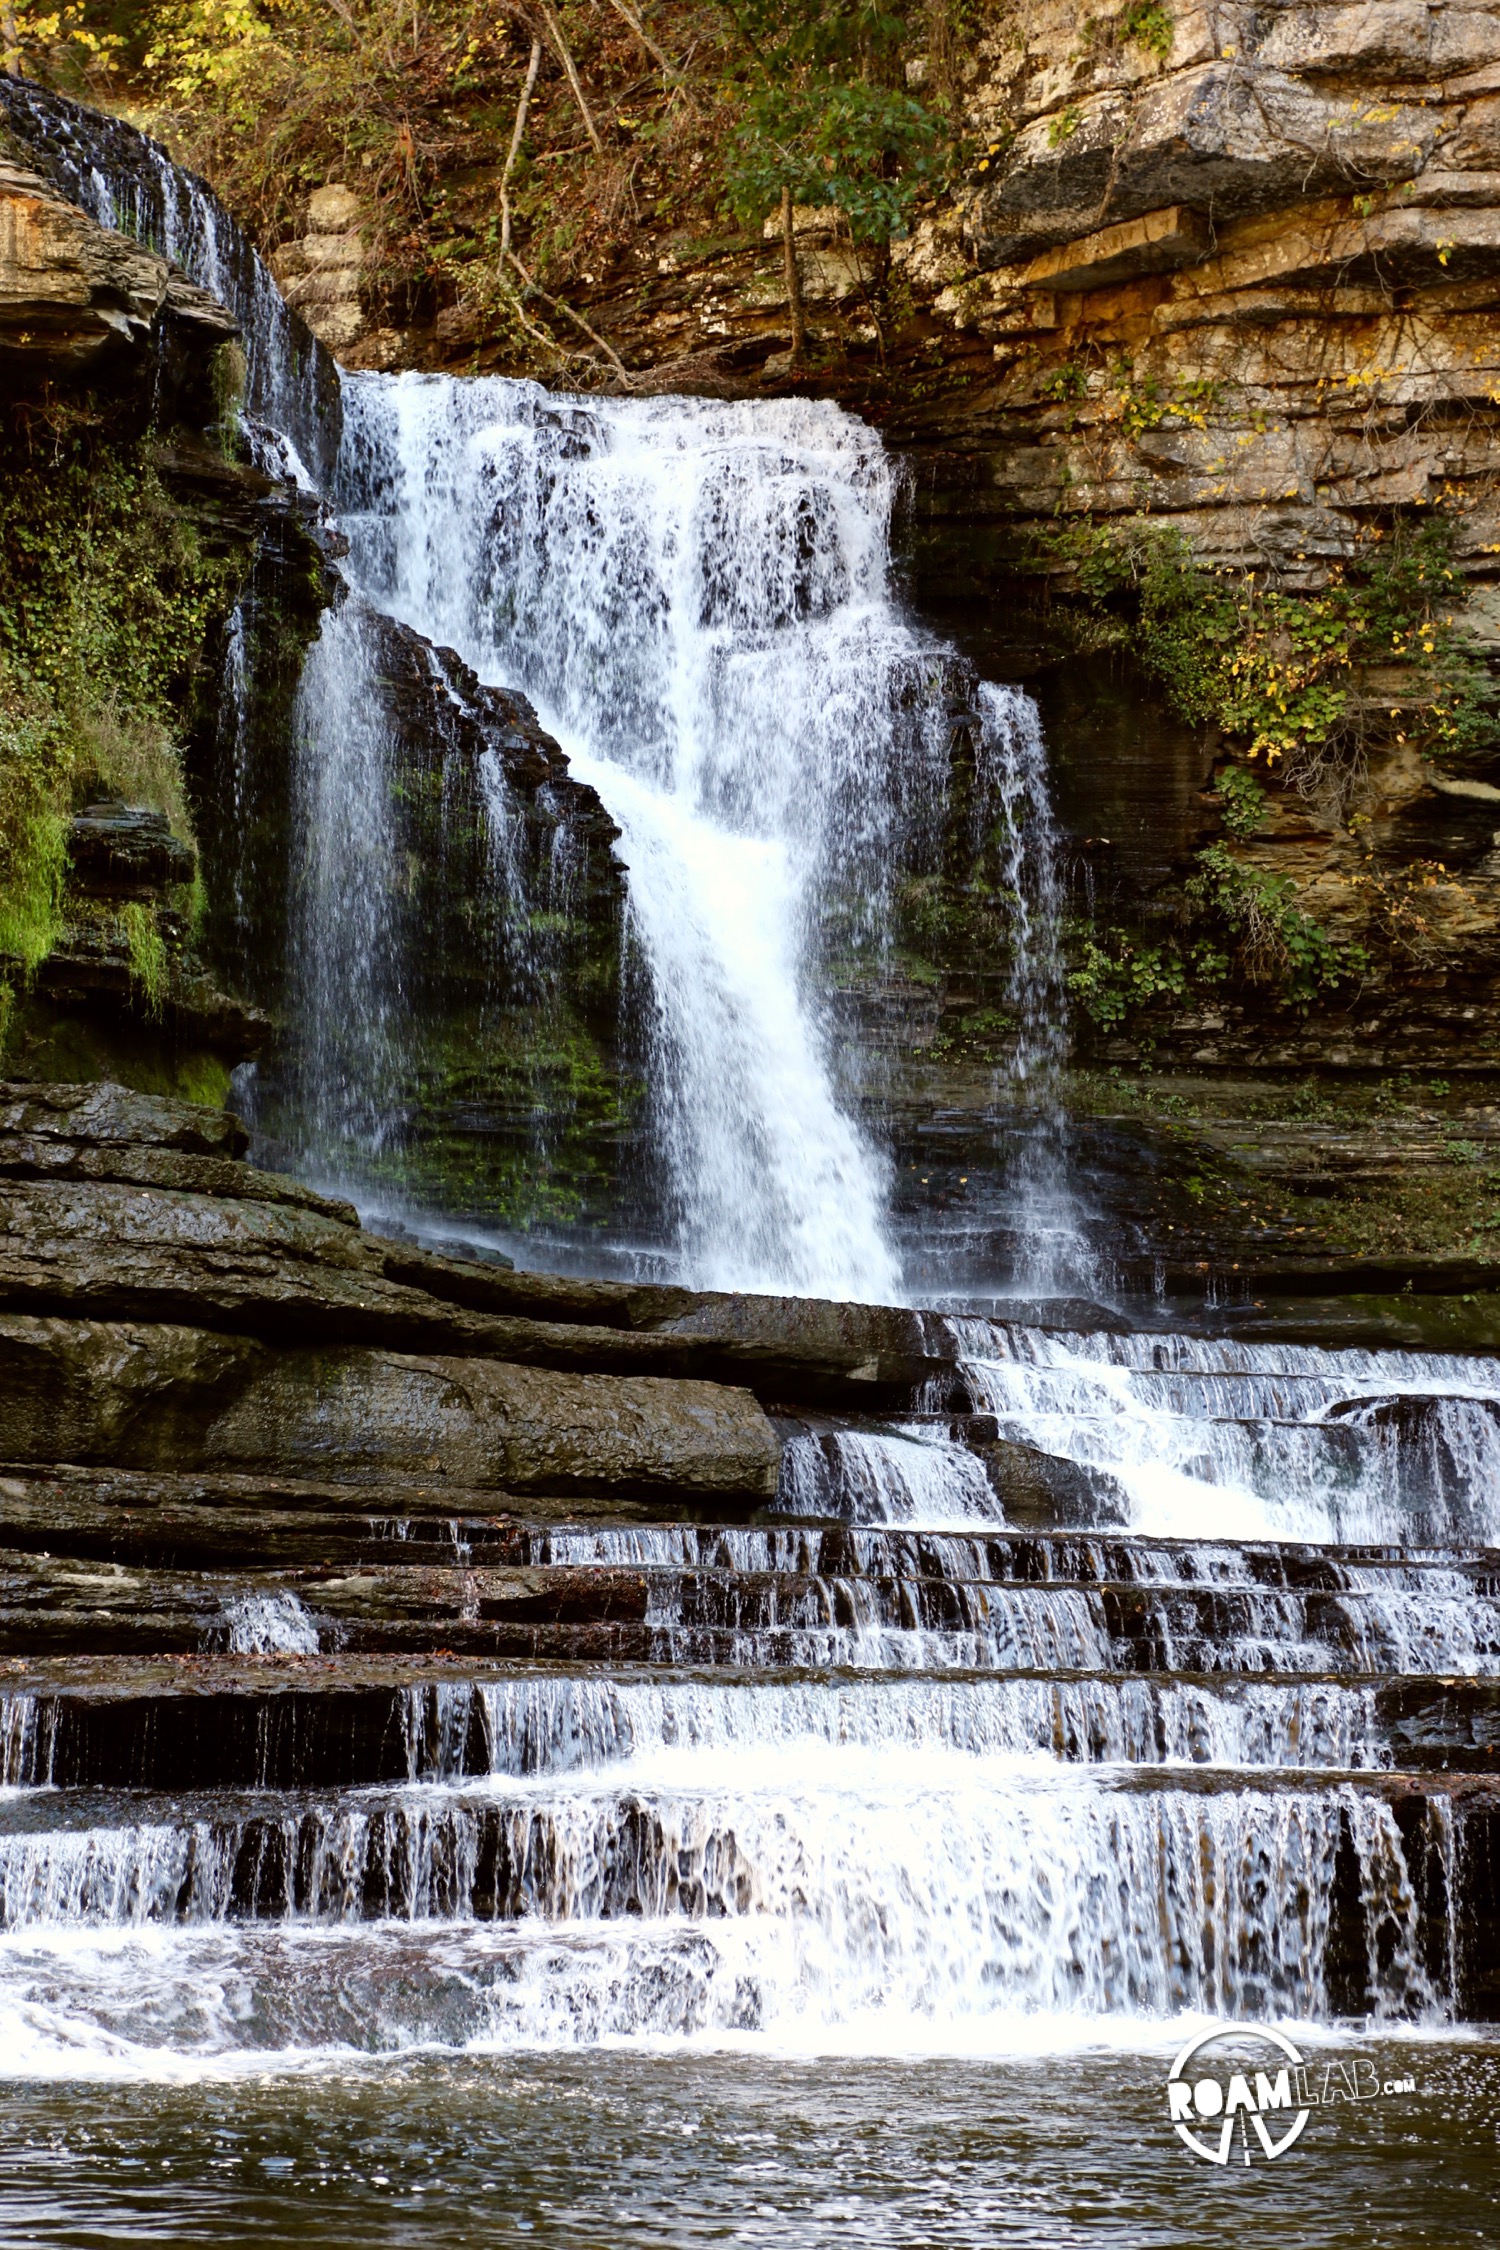 Cummins Falls State Park is located halfway between Nashville and Knoxville, Tennessee. That makes it the ideal getaway for both cities in wanting a some a hike, a waterfall, and an amazing water hole all in one place.